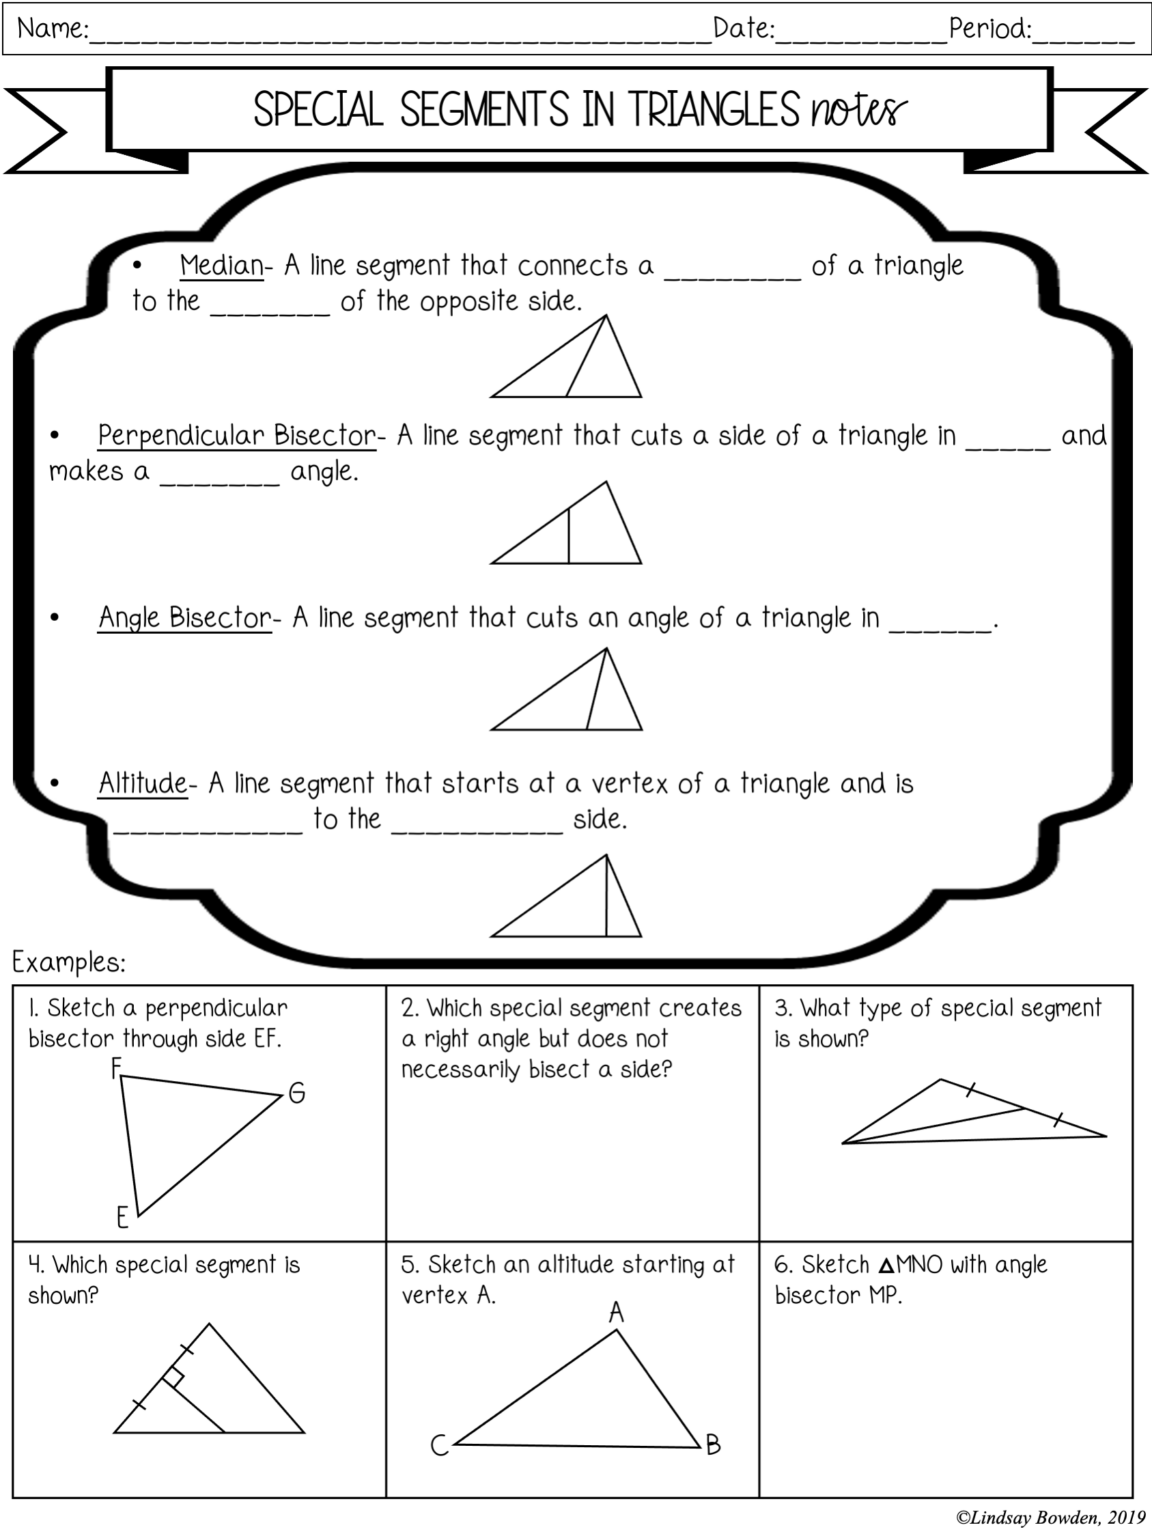 Triangle Centers Notes and Worksheets - Lindsay Bowden